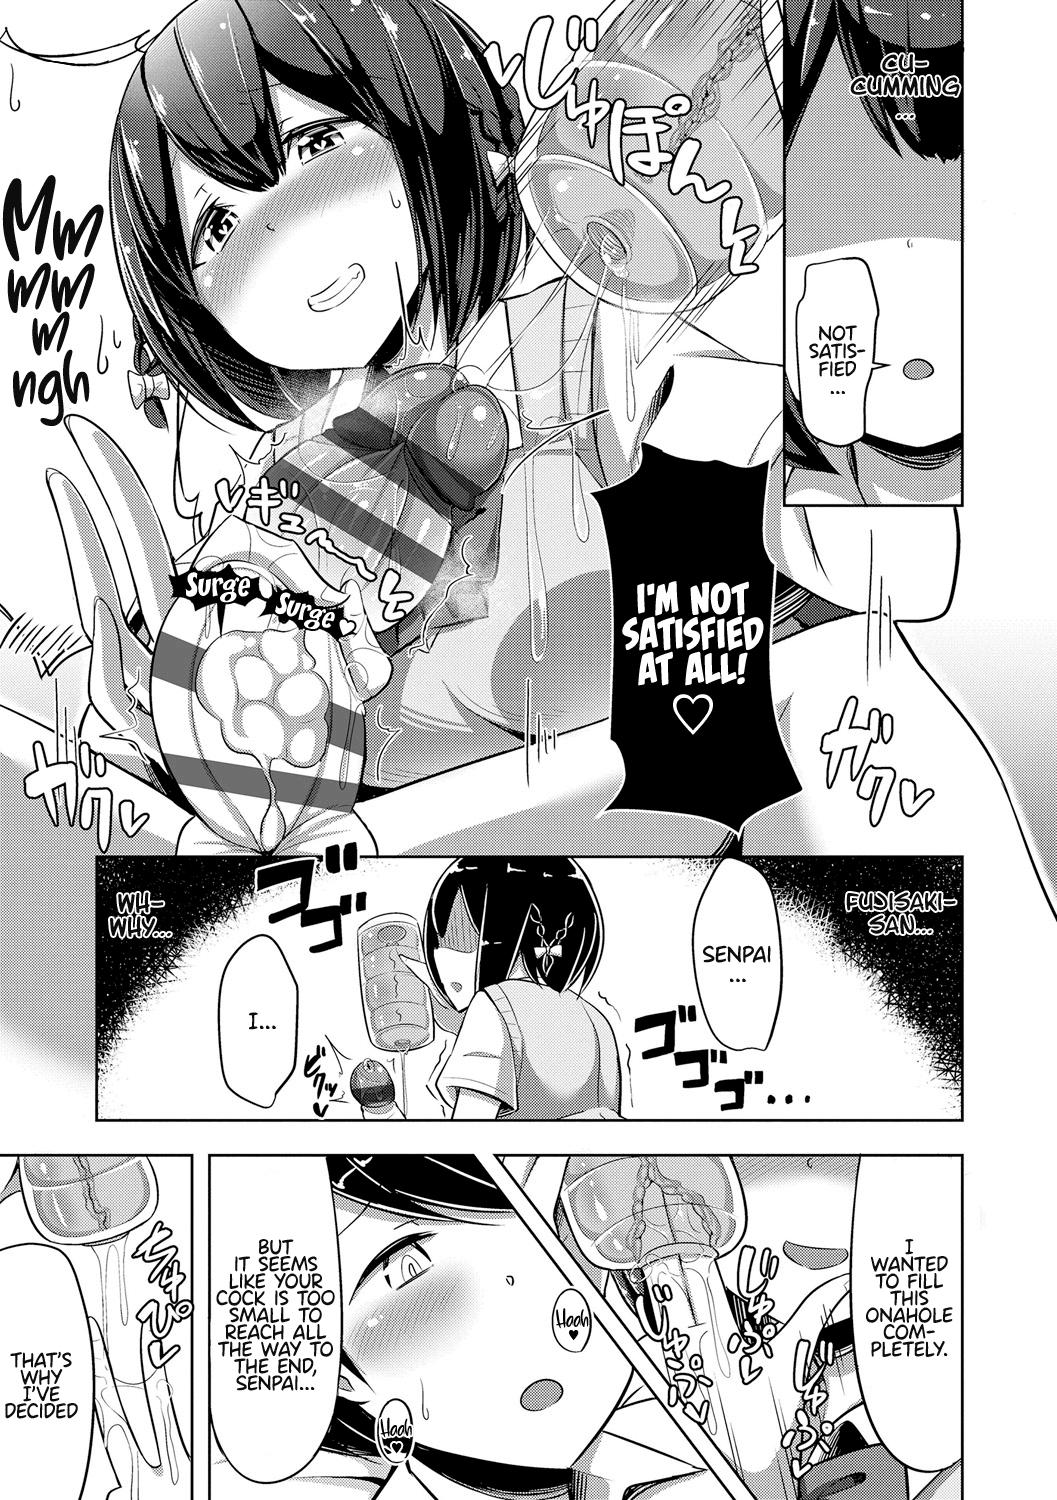 Buttfucking Afterschool ♥ Onahole~ Amature Allure - Page 11